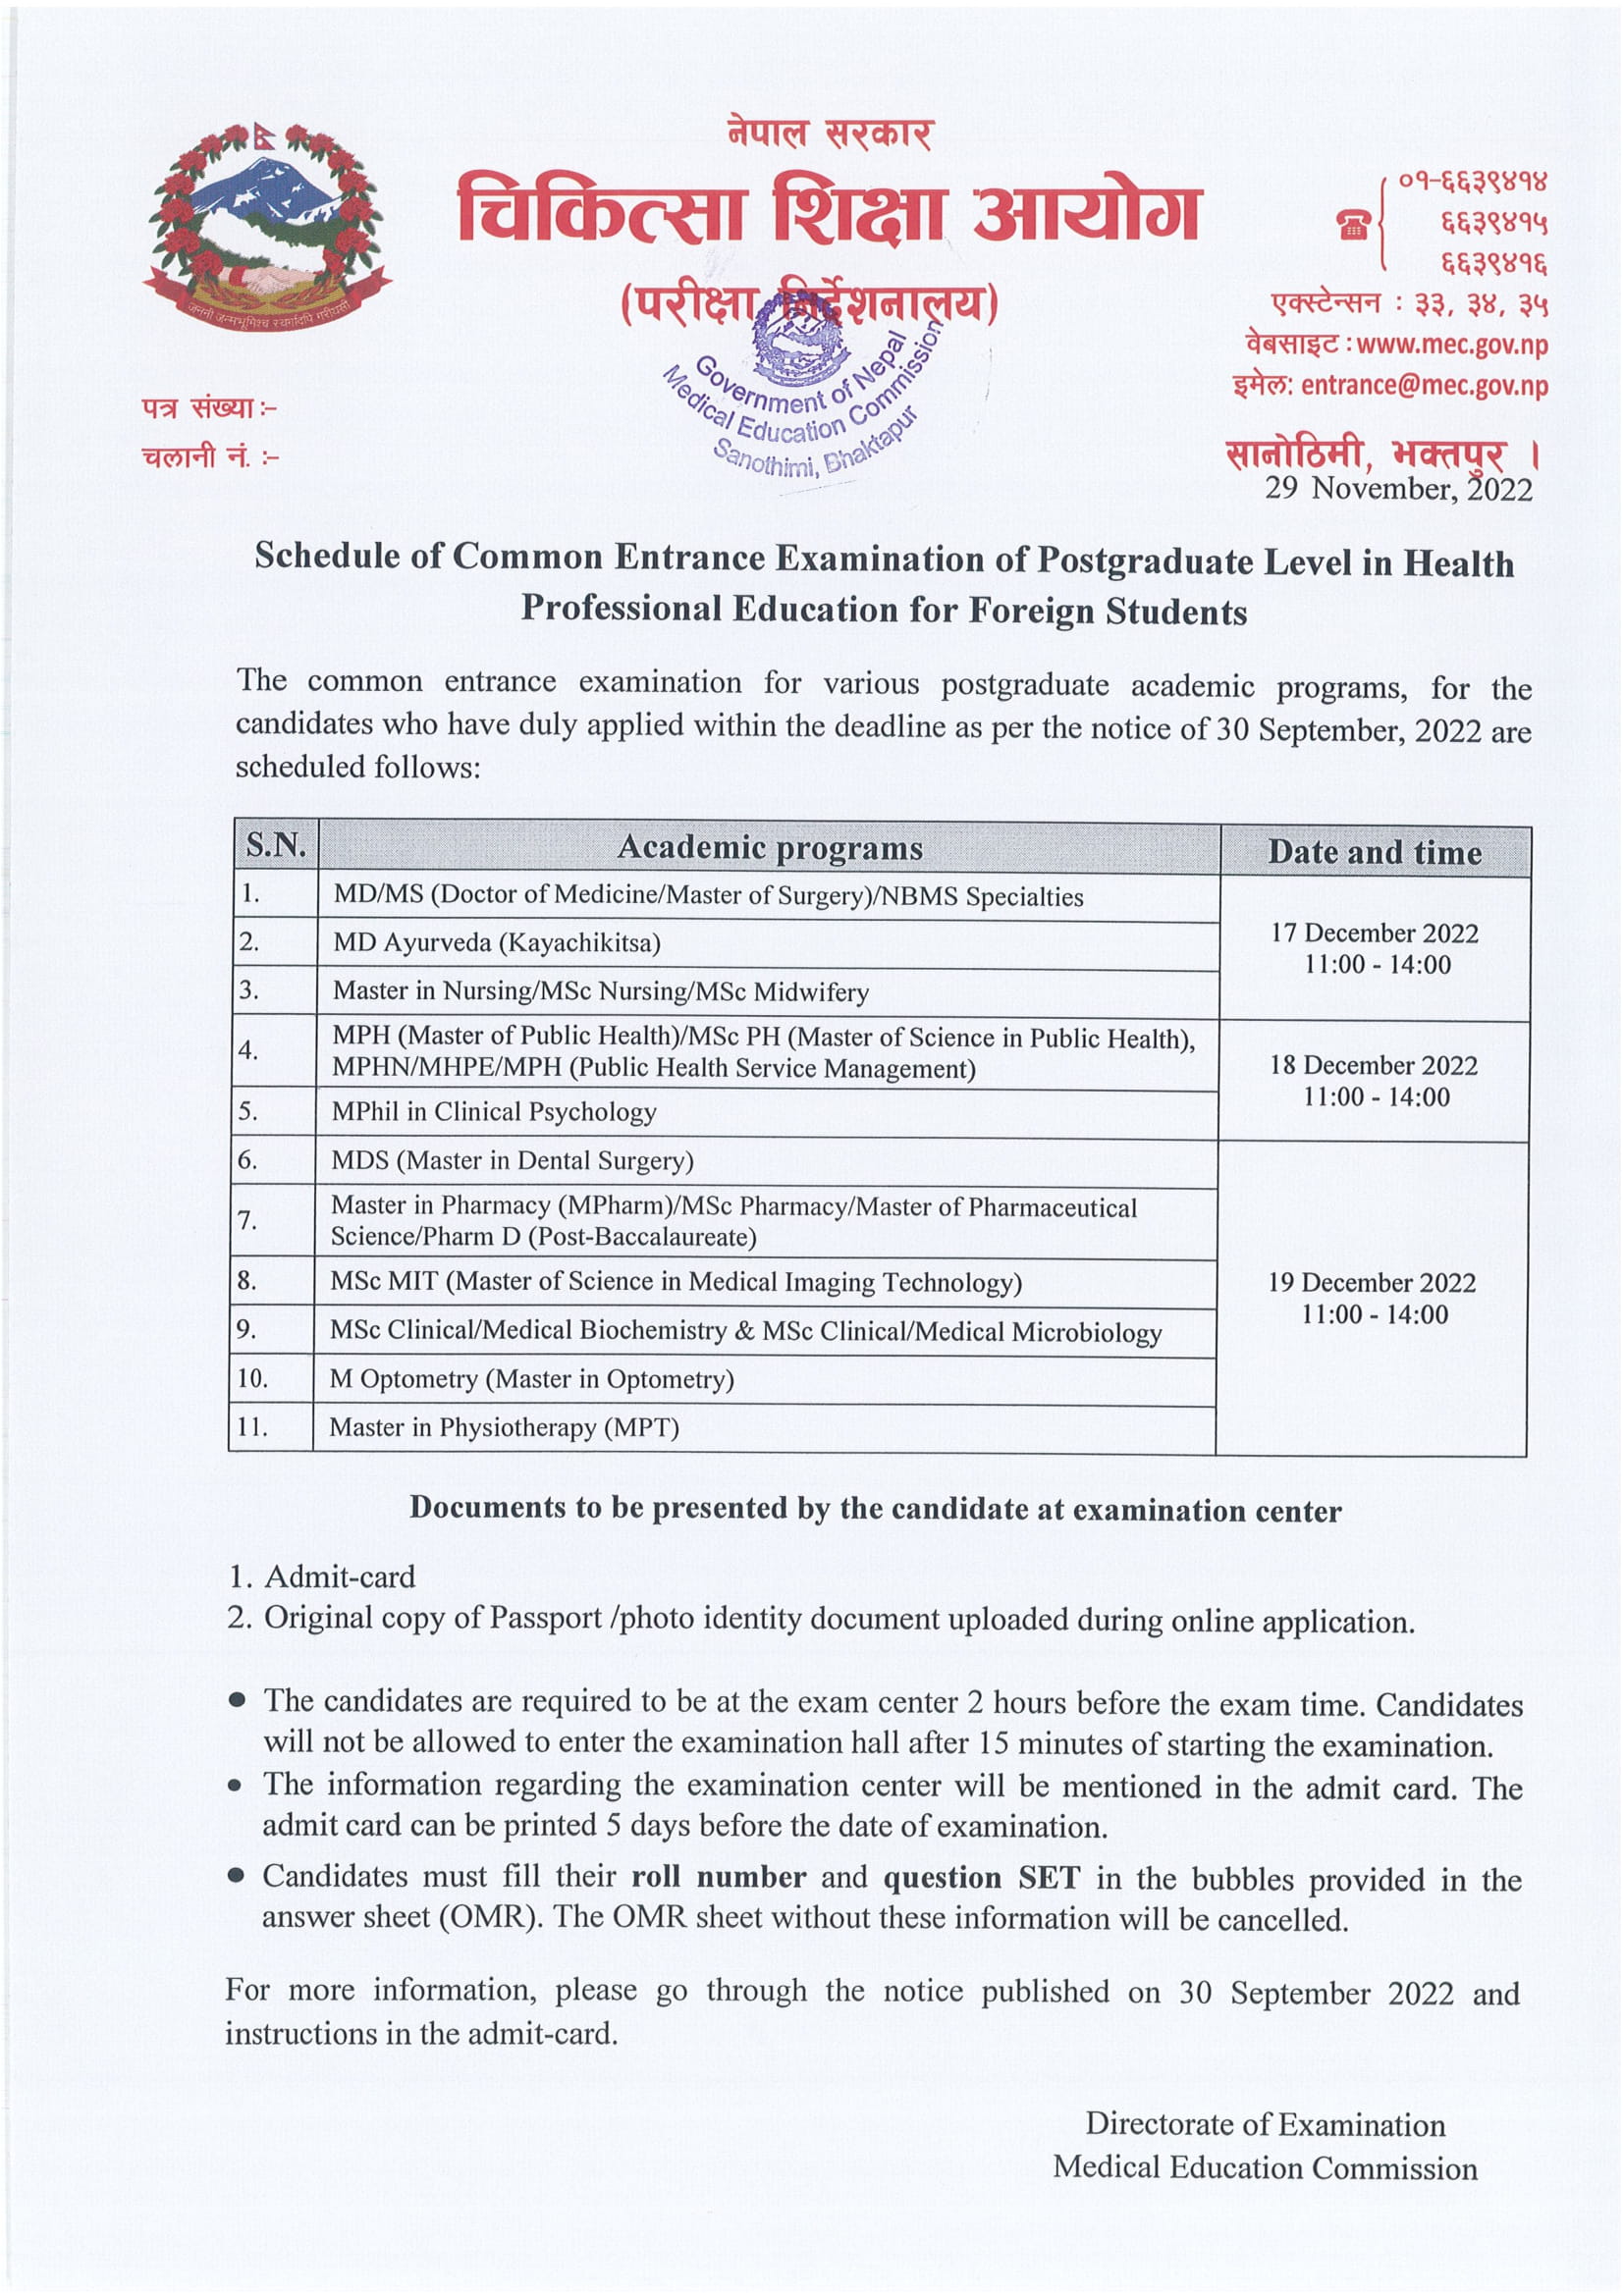 Schedule of Common Entrance Examination of Postgraduate Level in Health Professional Education for Foreign Students.